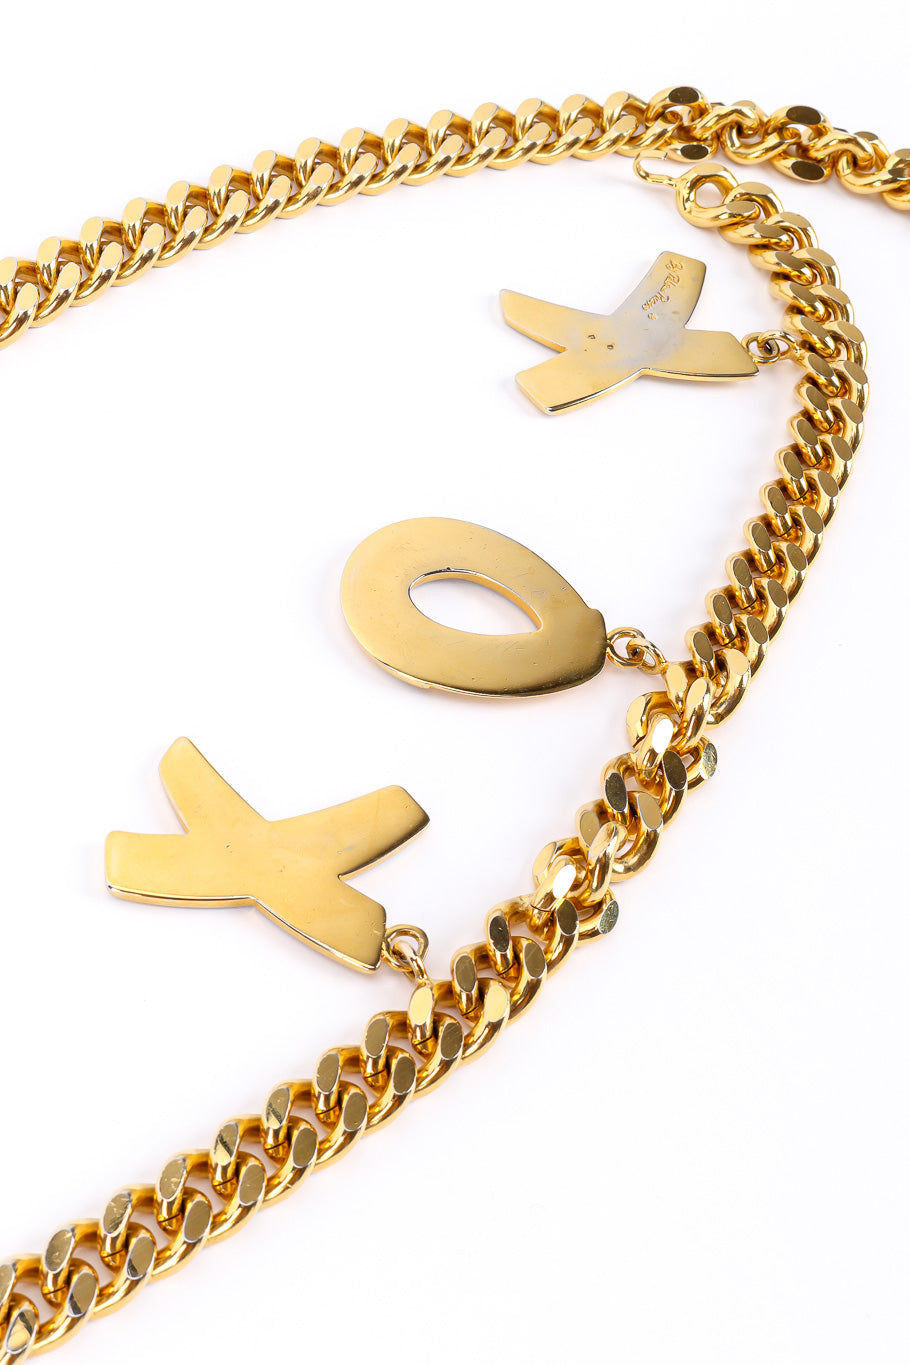 XOXO charm belt by Paloma Picasso on white background back of charms @recessla